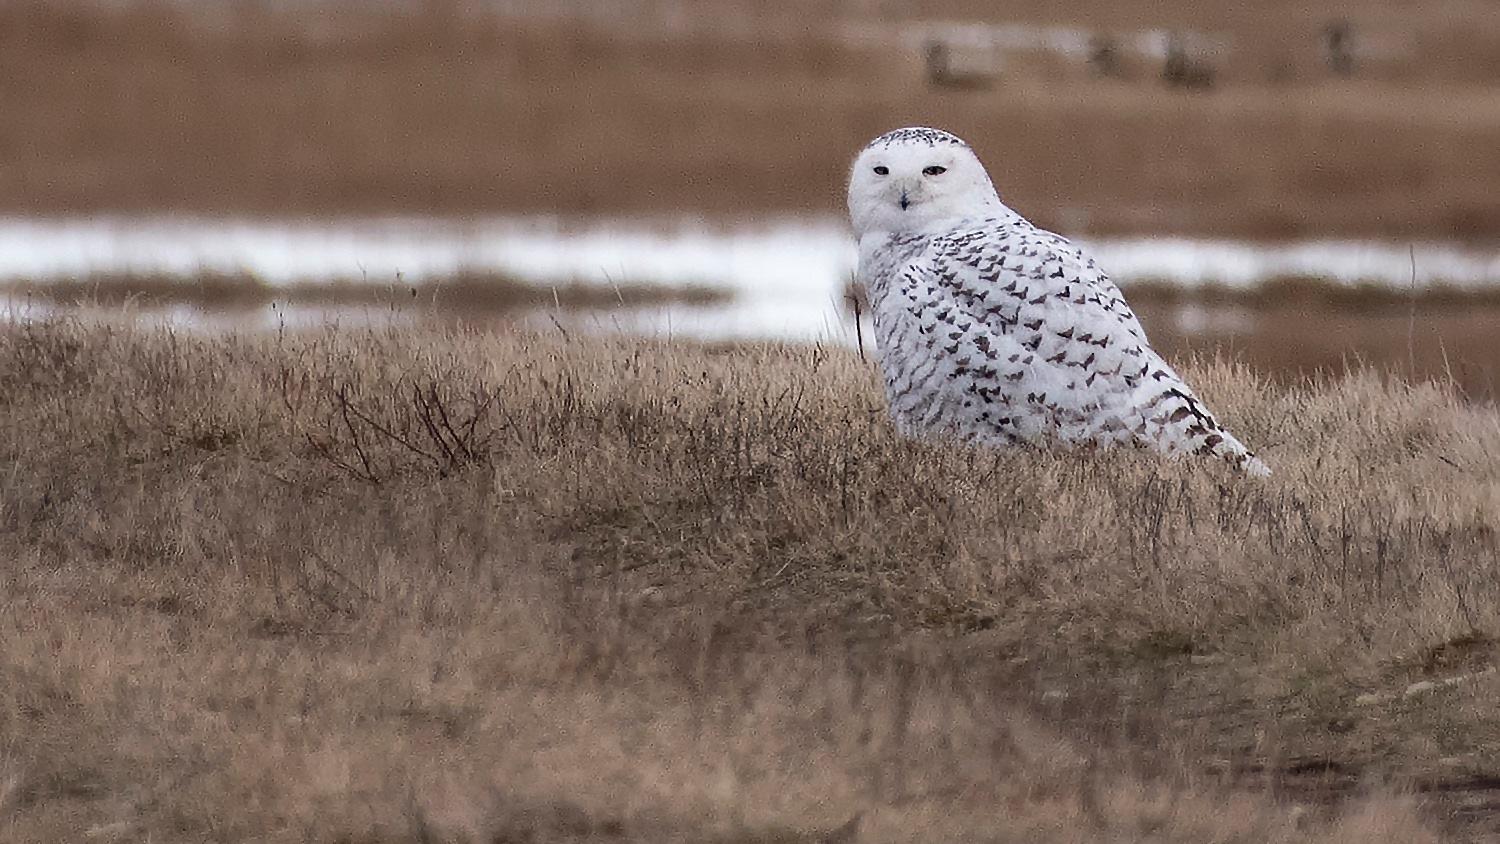 The whitest snowy owls are adult males. Juveniles and females have brown-flecked plumage. (U.S. Fish and Wildlife Service)